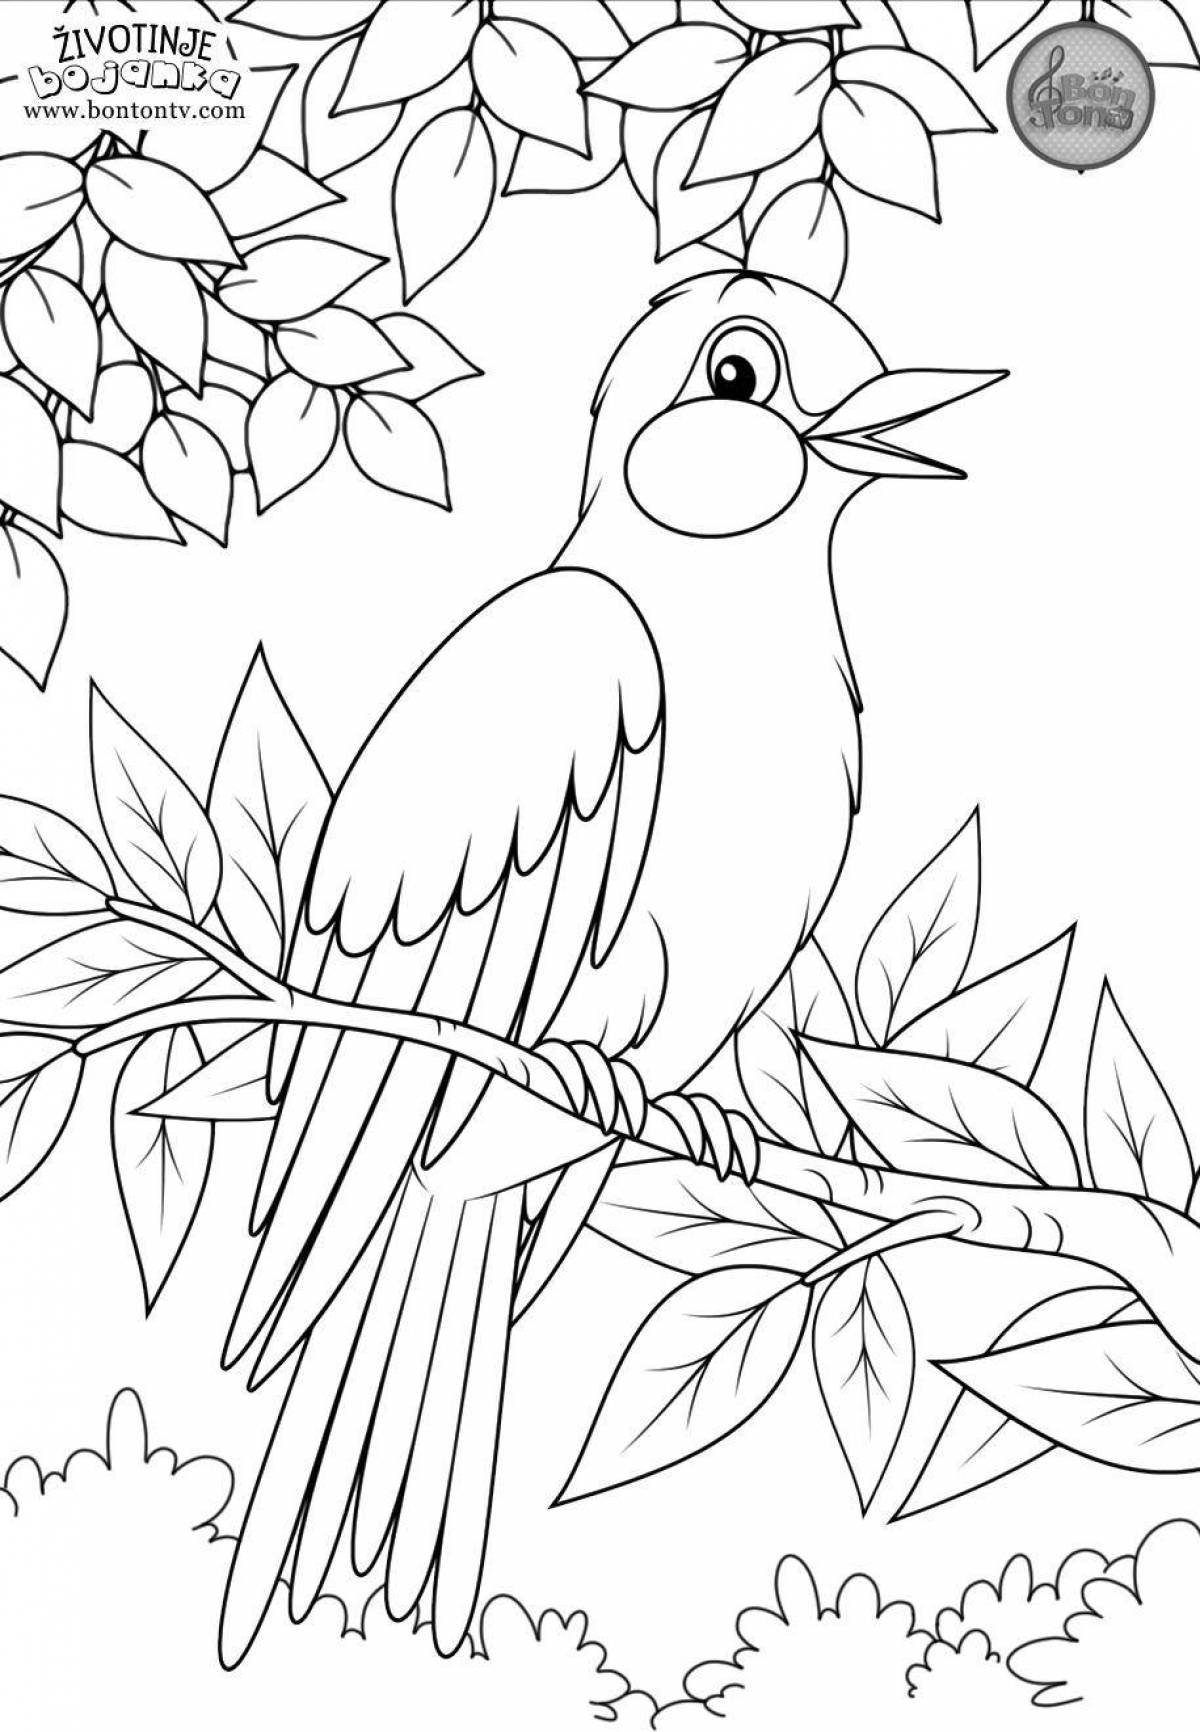 Coloring book magnificent nightingale